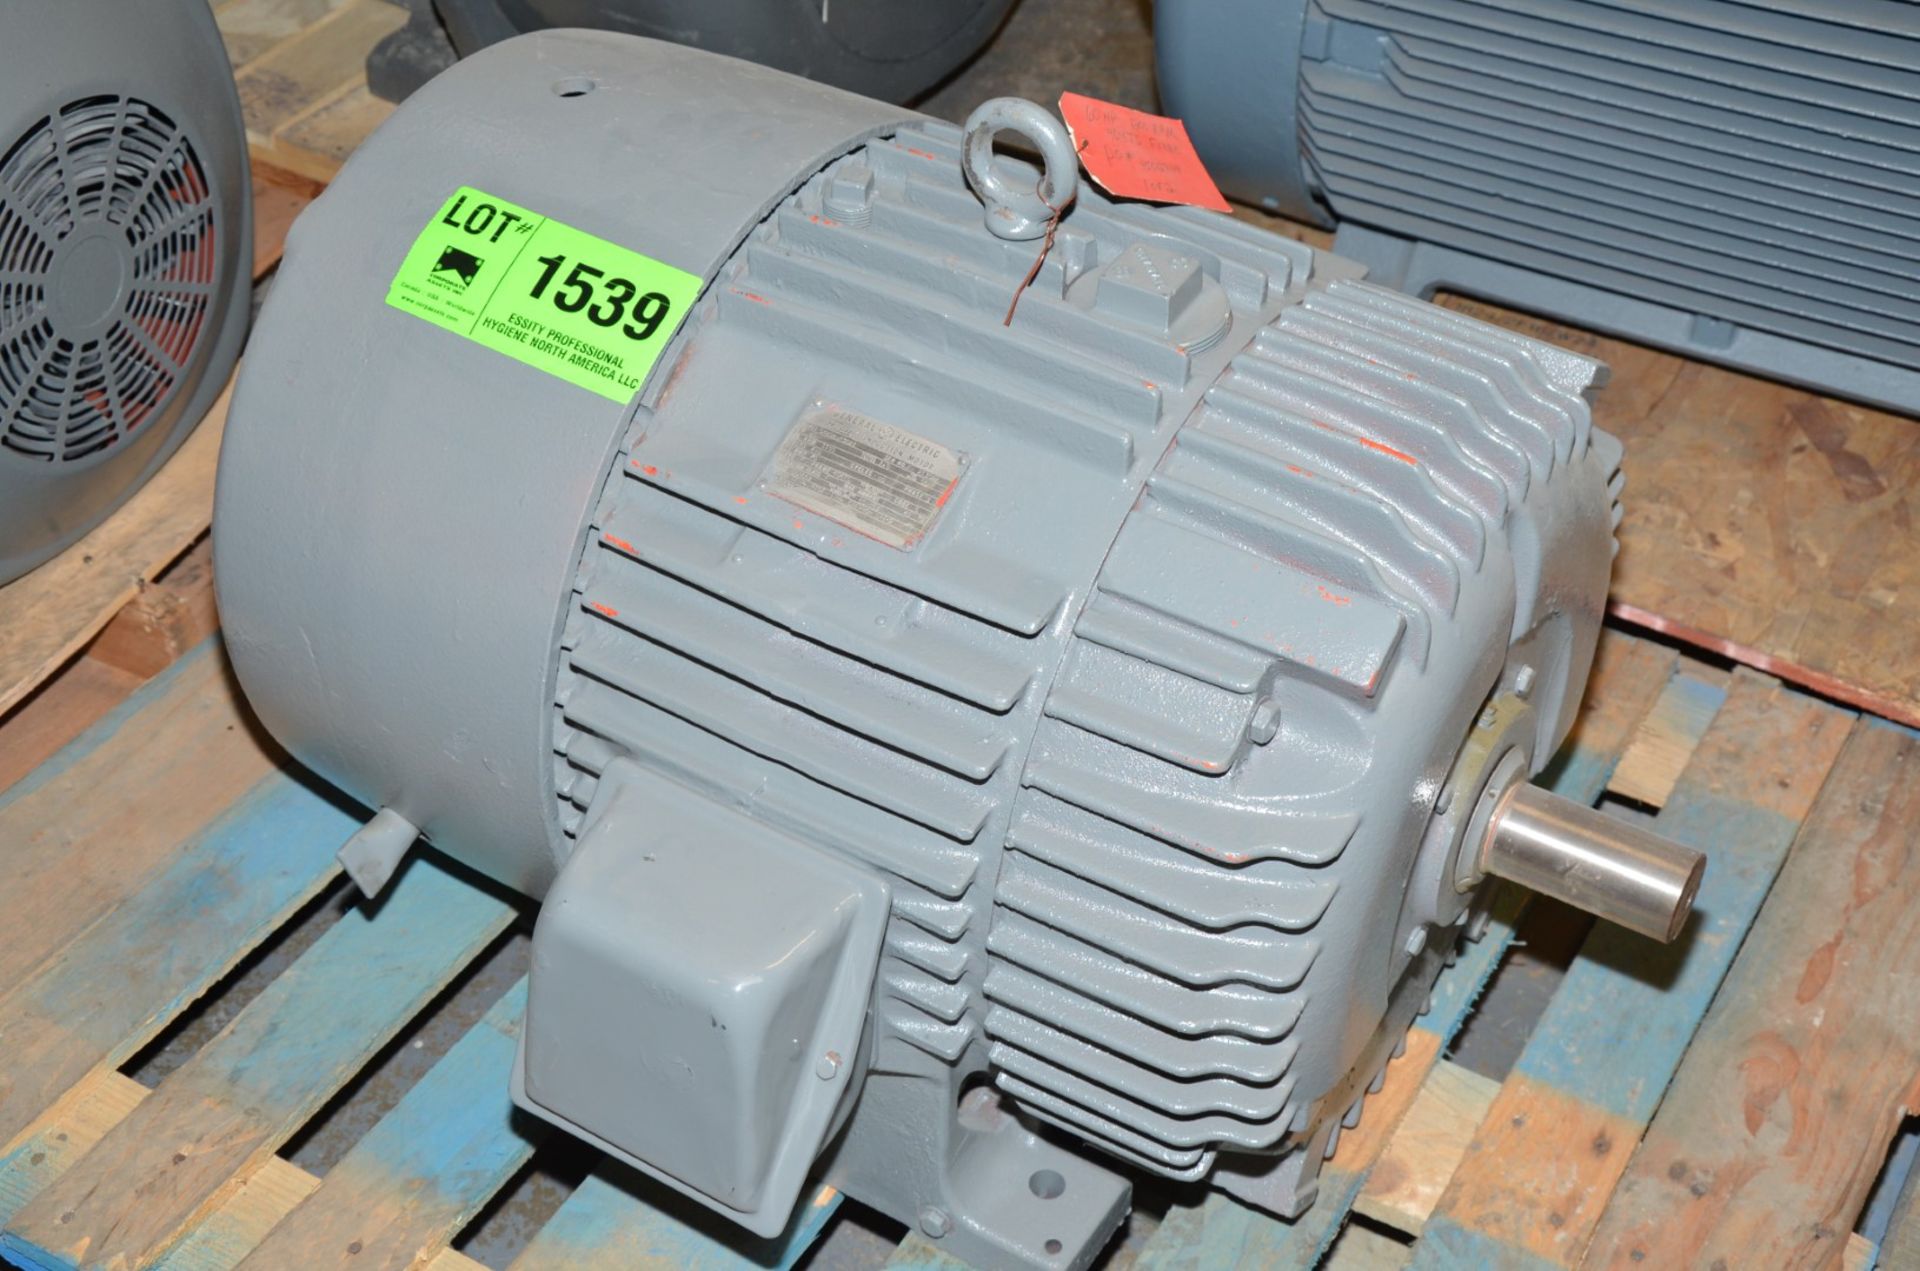 GE 60 HP 1185 RPM 460V ELECTRIC MOTOR [RIGGING FEE FOR LOT #1539 - $50 USD PLUS APPLICABLE TAXES]